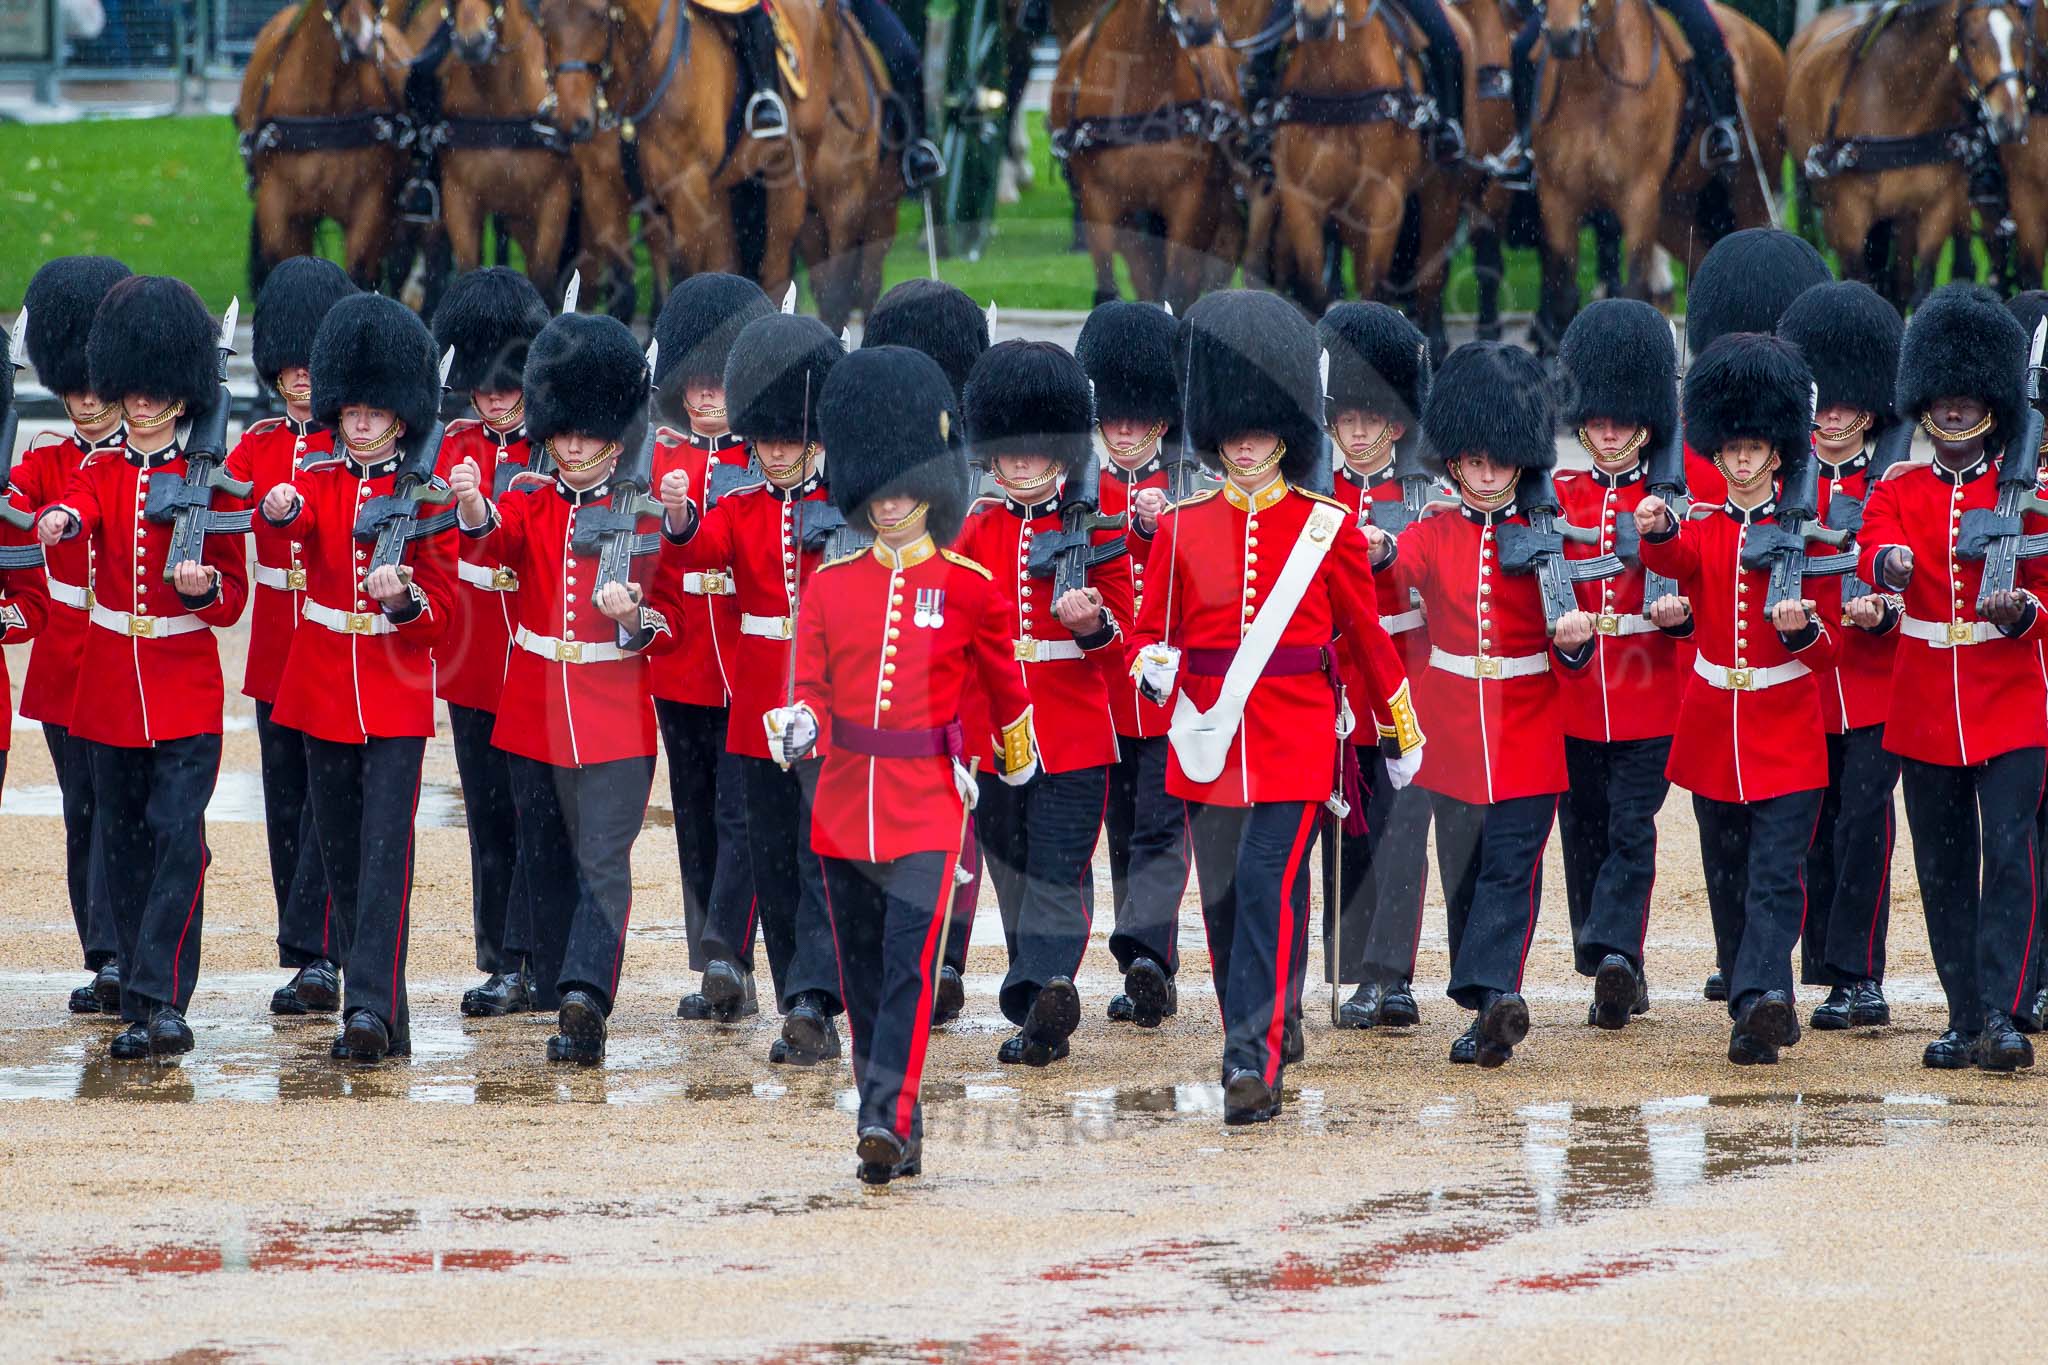 The Colonel's Review 2014.
Horse Guards Parade, Westminster,
London,

United Kingdom,
on 07 June 2014 at 11:15, image #363